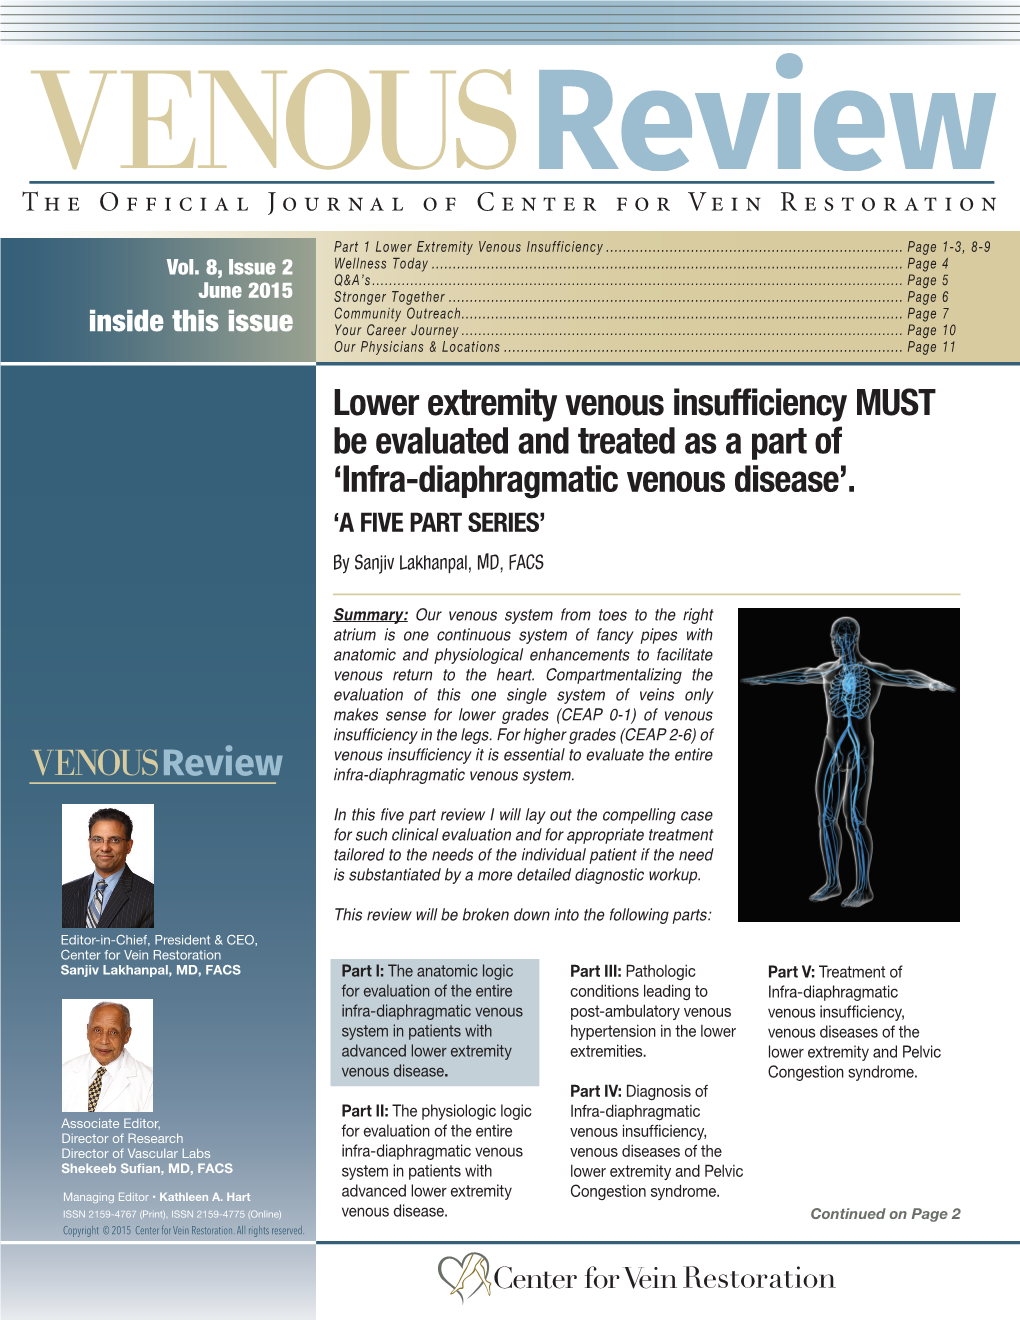 Lower Extremity Venous Insufficiency MUST Be Evaluated and Treated As a Part of ‘Infra-Diaphragmatic Venous Disease’